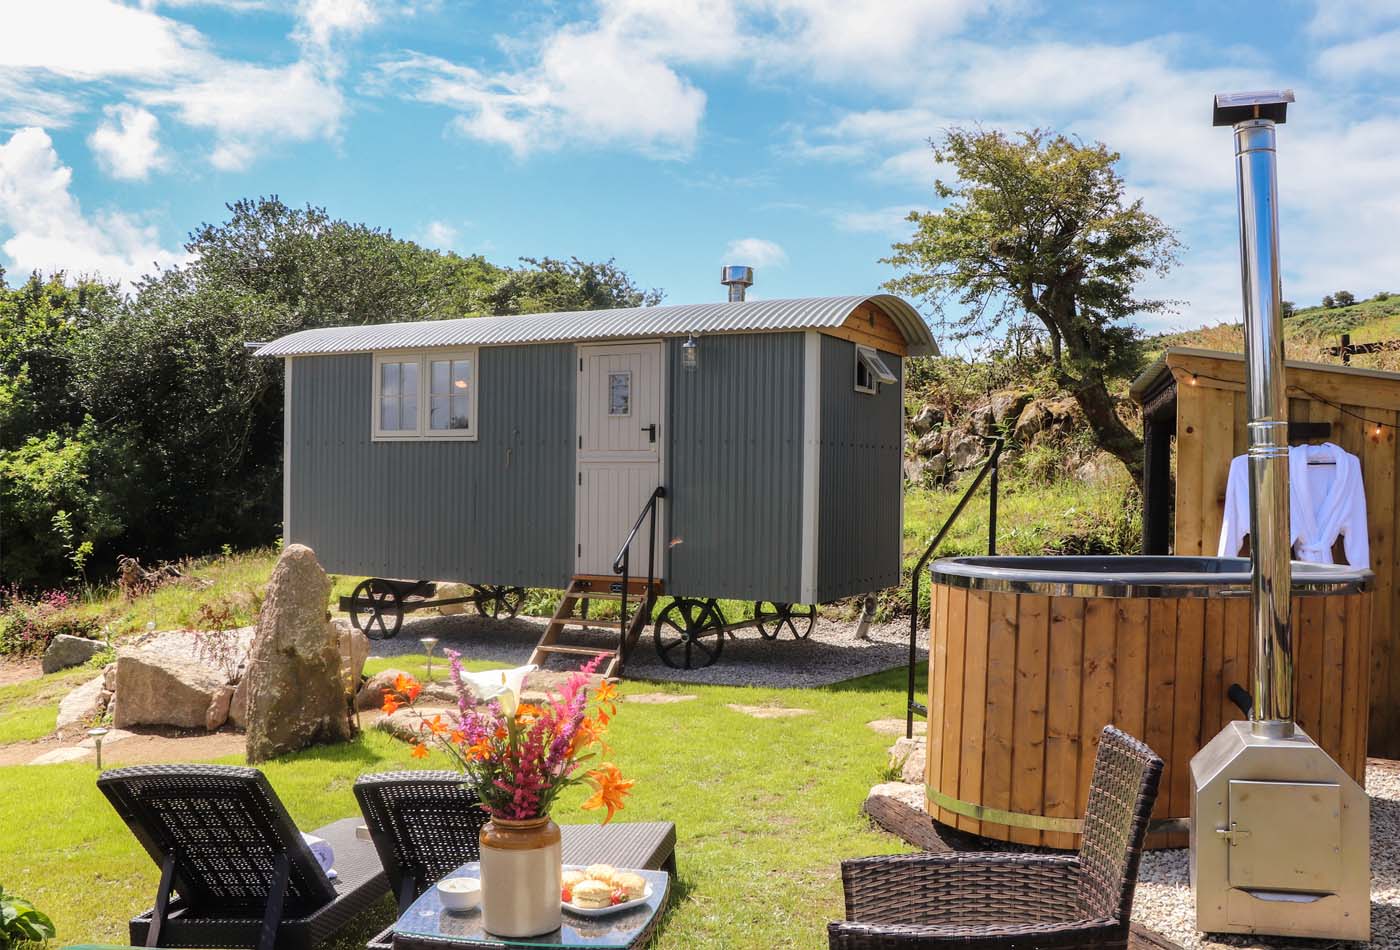 Outside view of Bosulla Shepherds Hut, Penzance, with a hot tub and deck chairs in front.